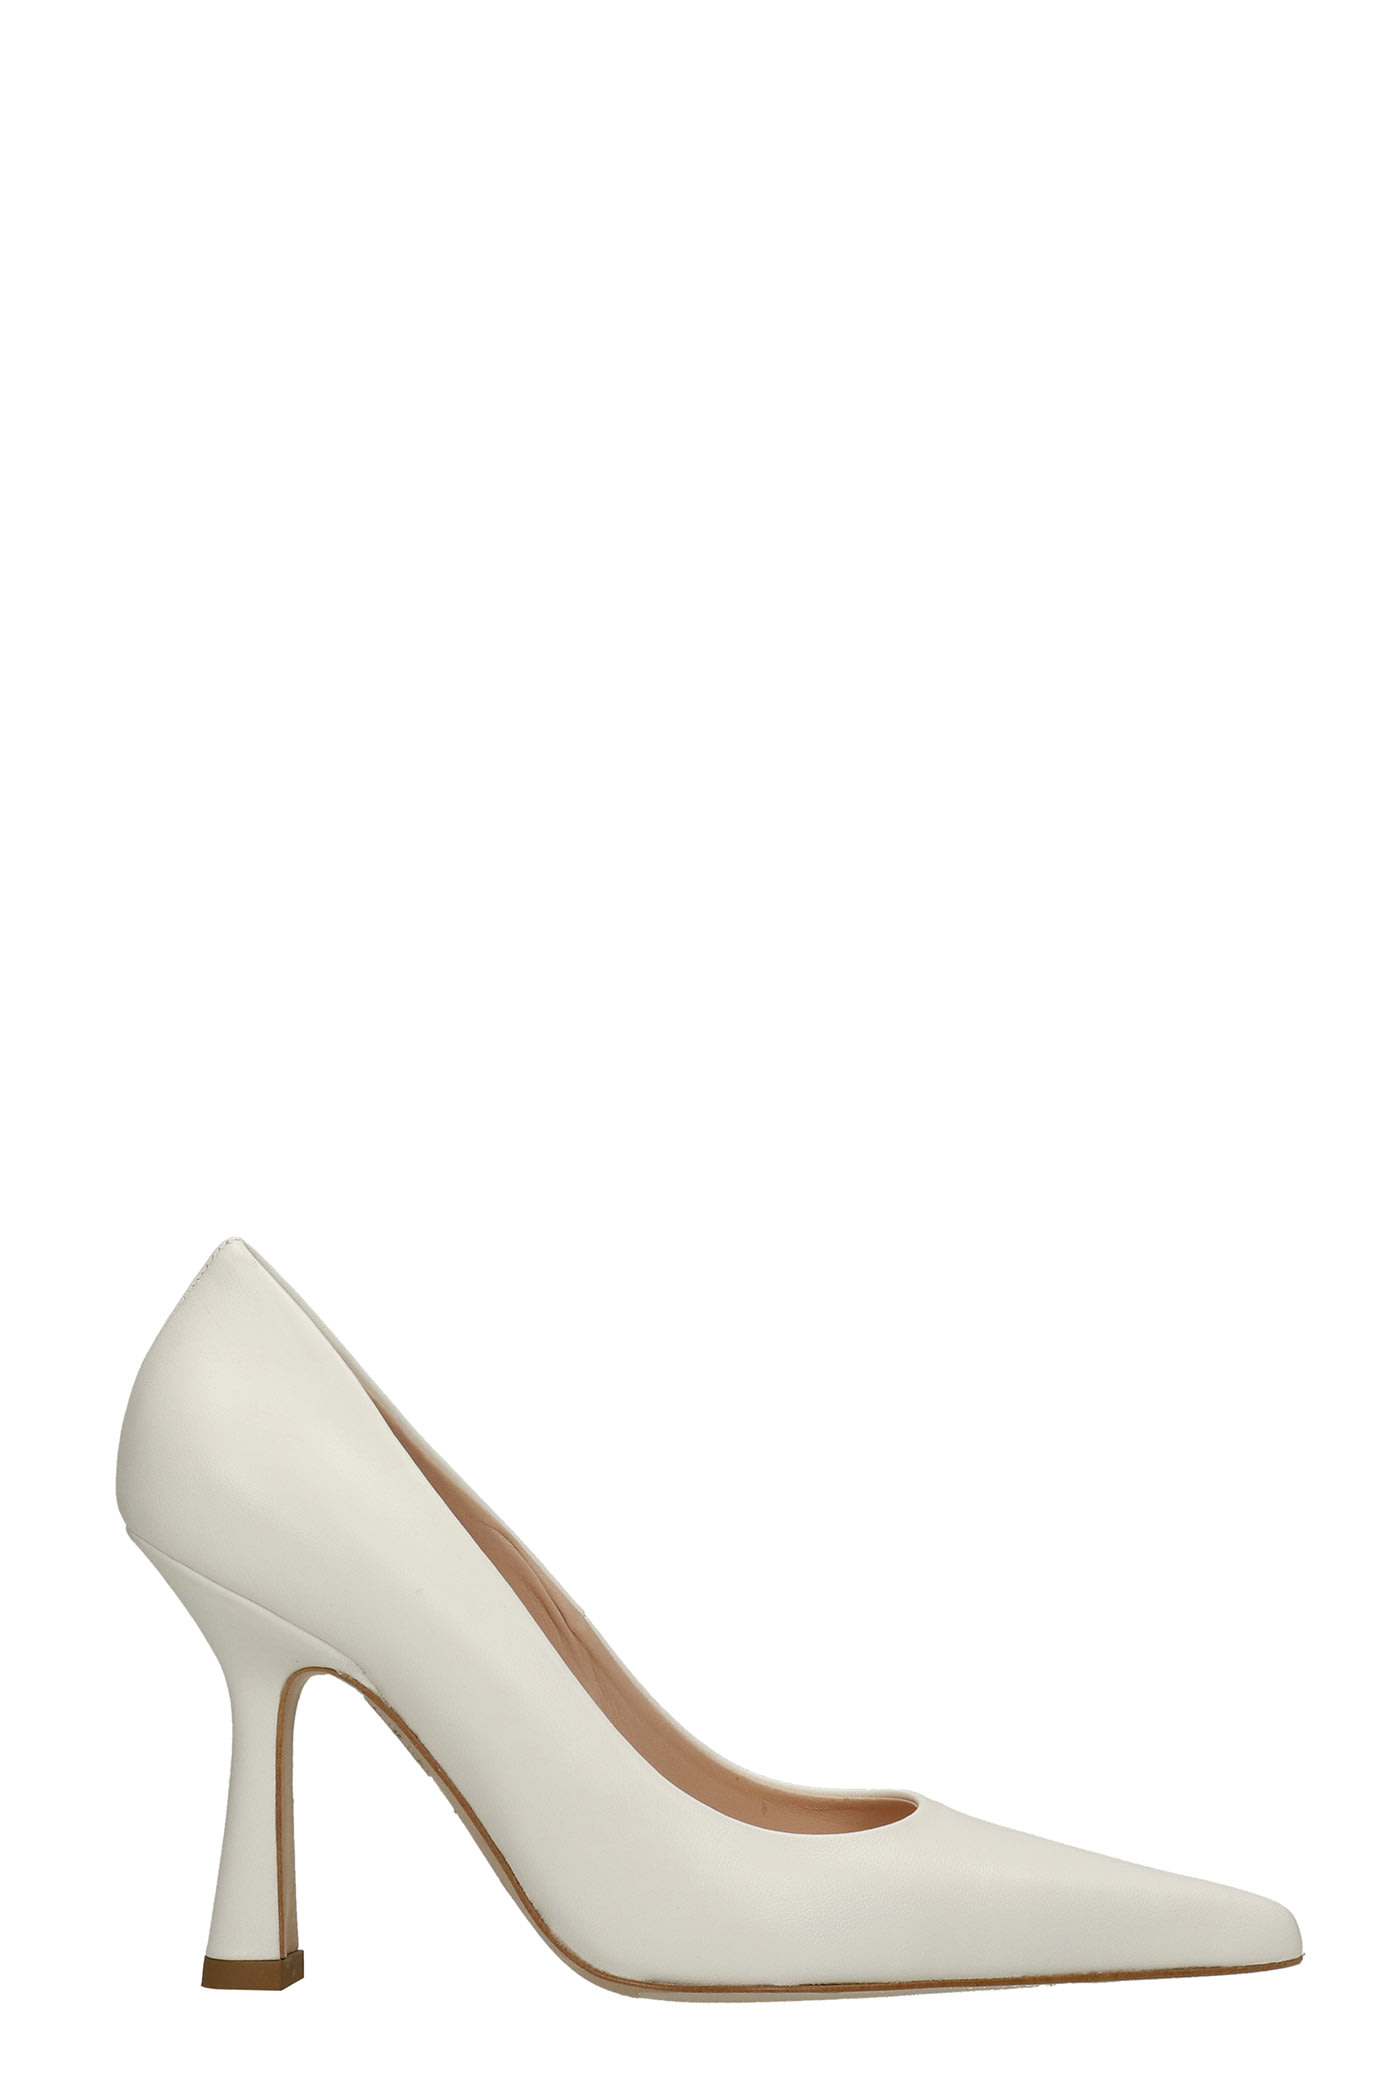 Liu-Jo Pointy Lh02 Pumps In White Leather